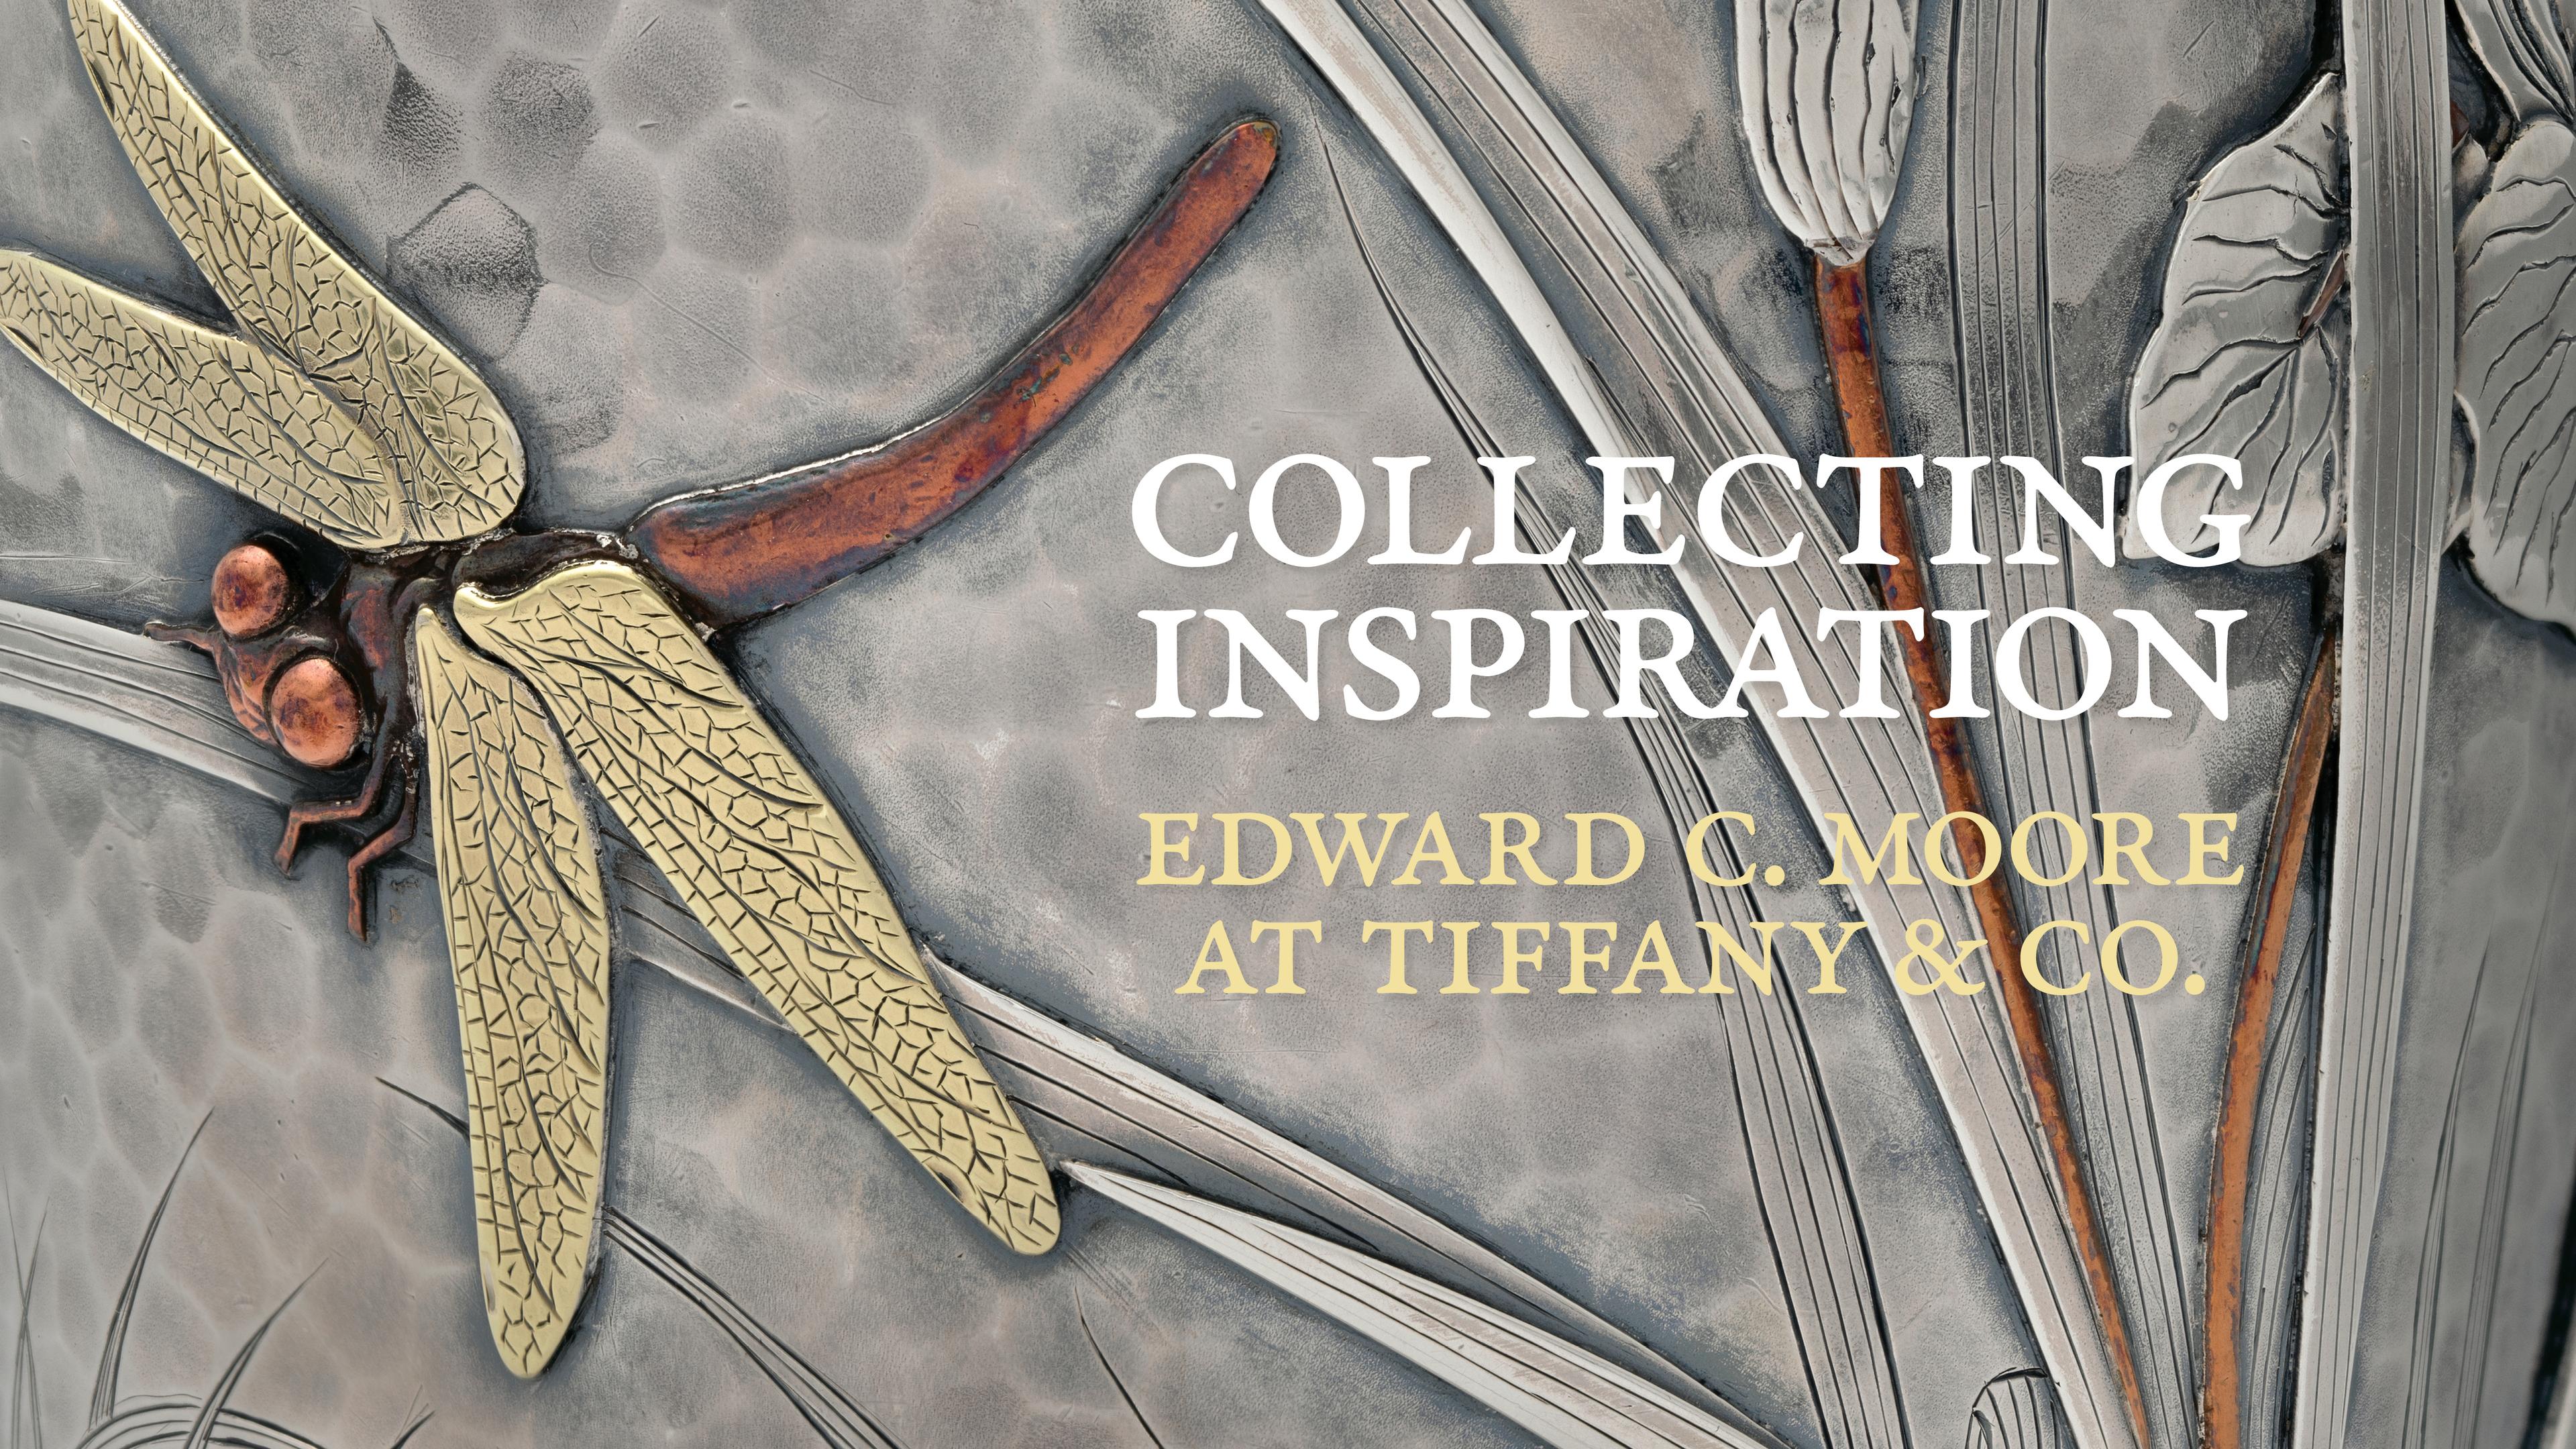 Picture of bold letter wording "collecting inspiration. Edward C. Moore at Tiffany and co" with drawing of a copper fish coming up for water and a dragon fly landing on plants. 